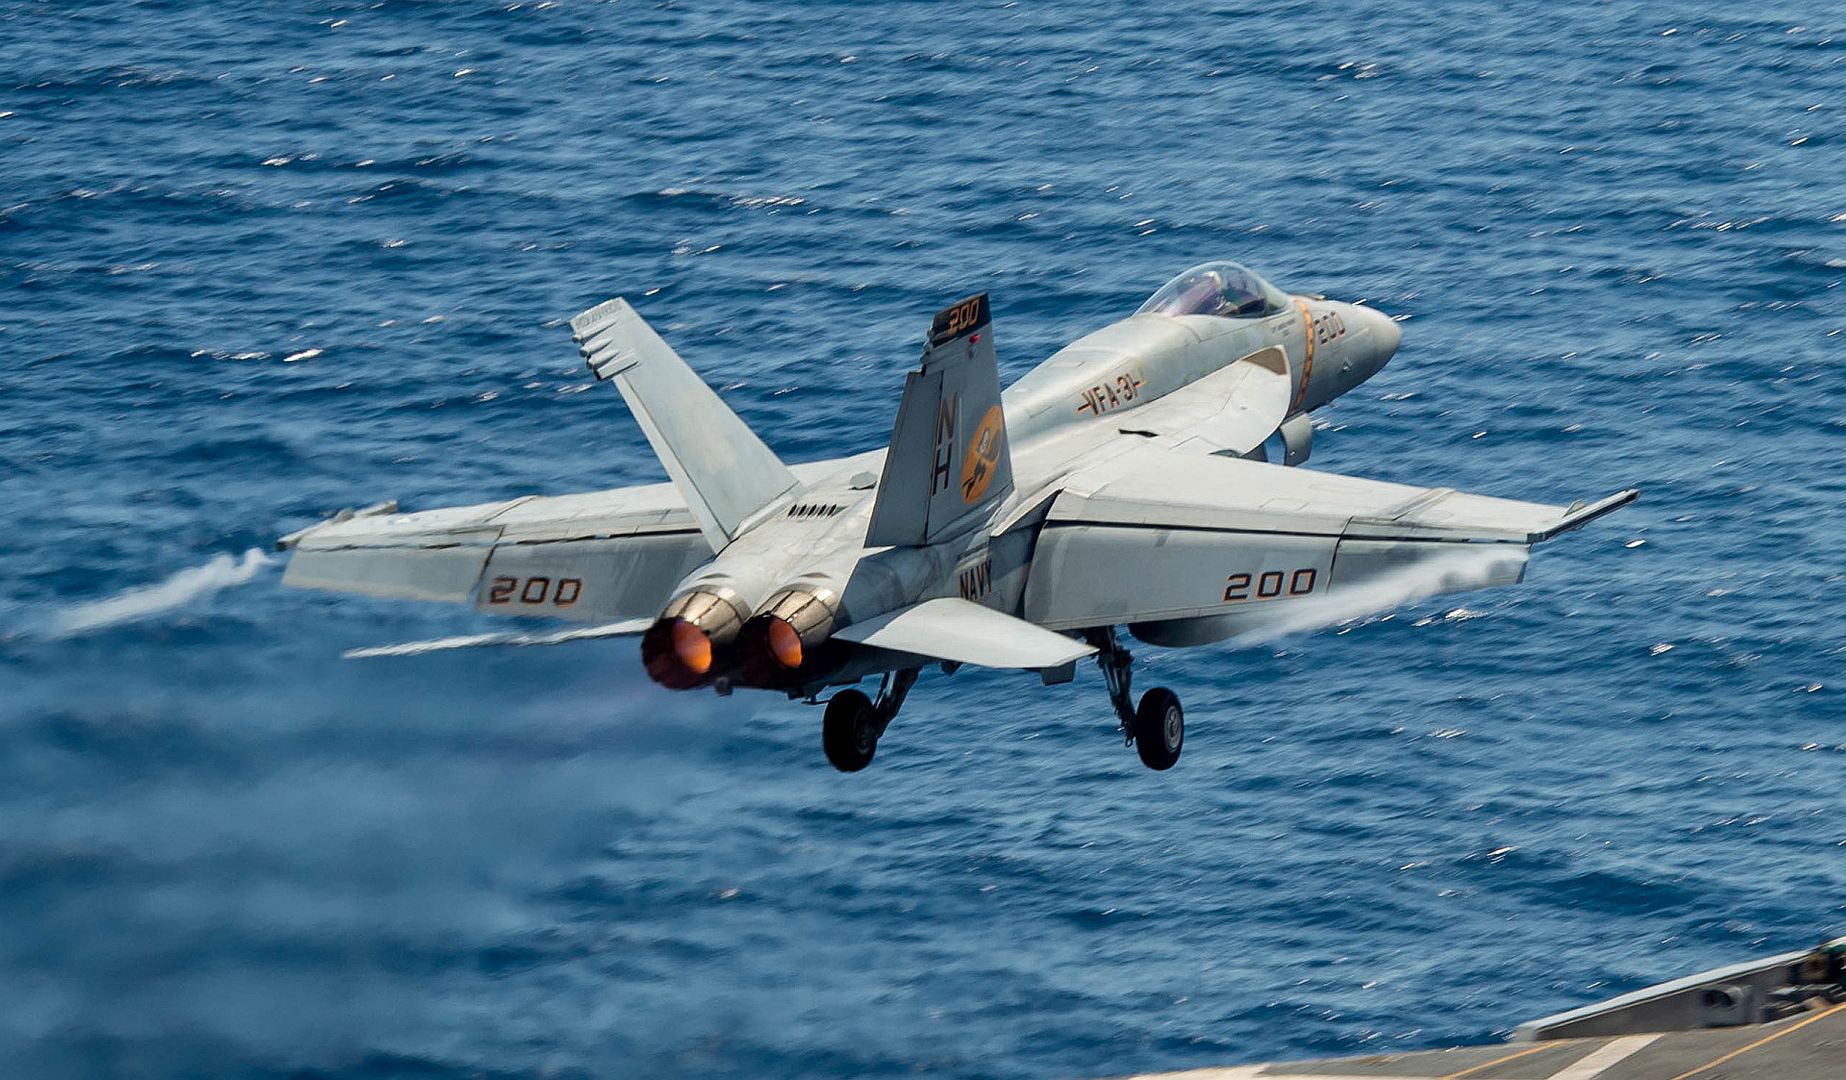  Launches From The Flight Deck Of The Aircraft Carrier USS Theodore Roosevelt